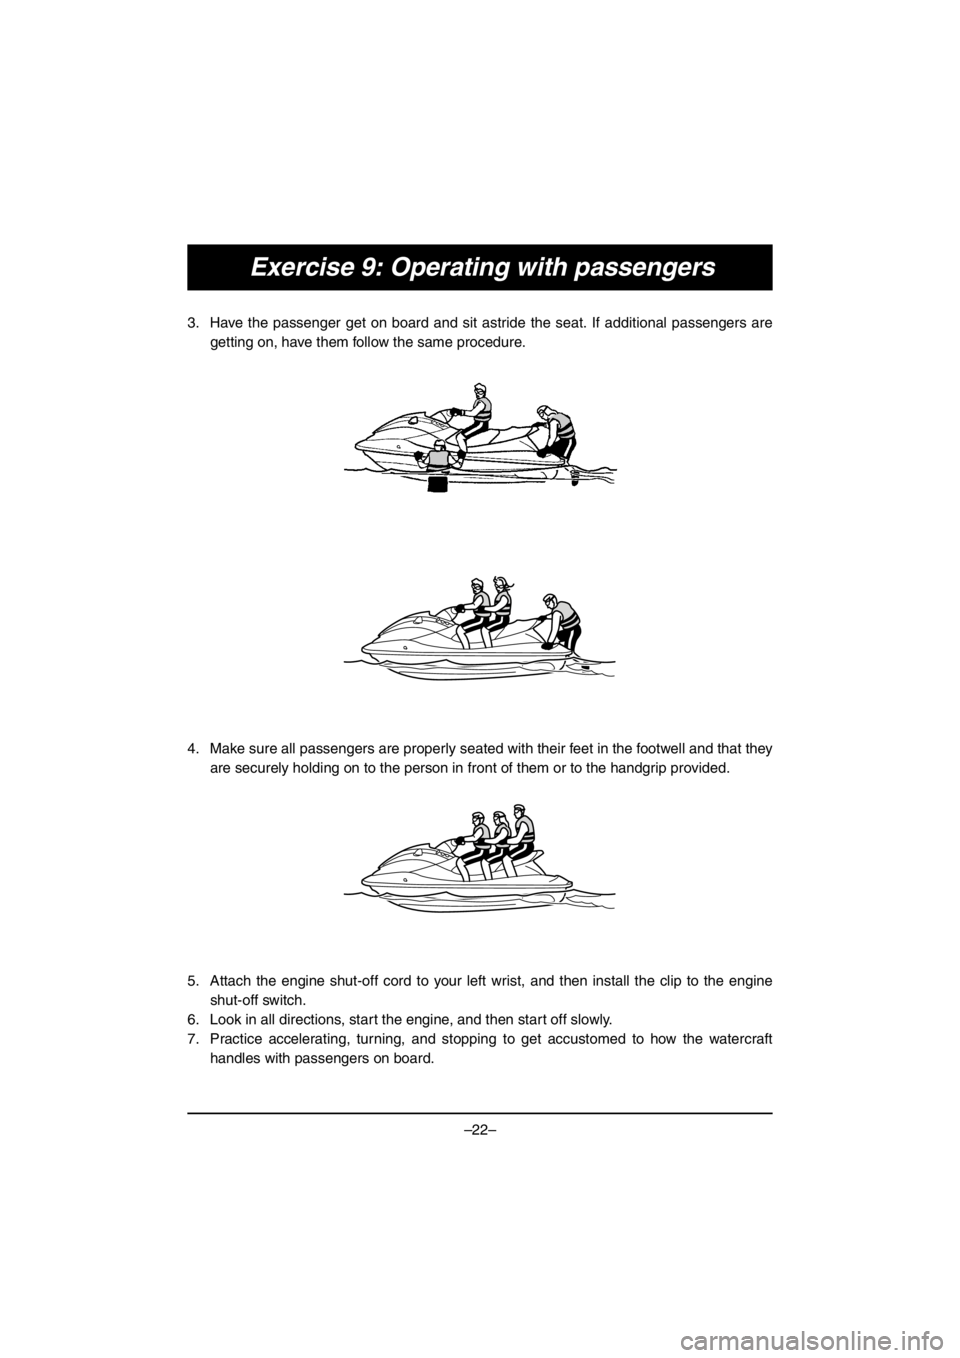 YAMAHA EX 2017  Notices Demploi (in French) –22–
Exercise 9: Operating with passengers
3. Have the passenger get on board and sit astride the seat. If additional passengers are
getting on, have them follow the same procedure. 
4. Make sure 